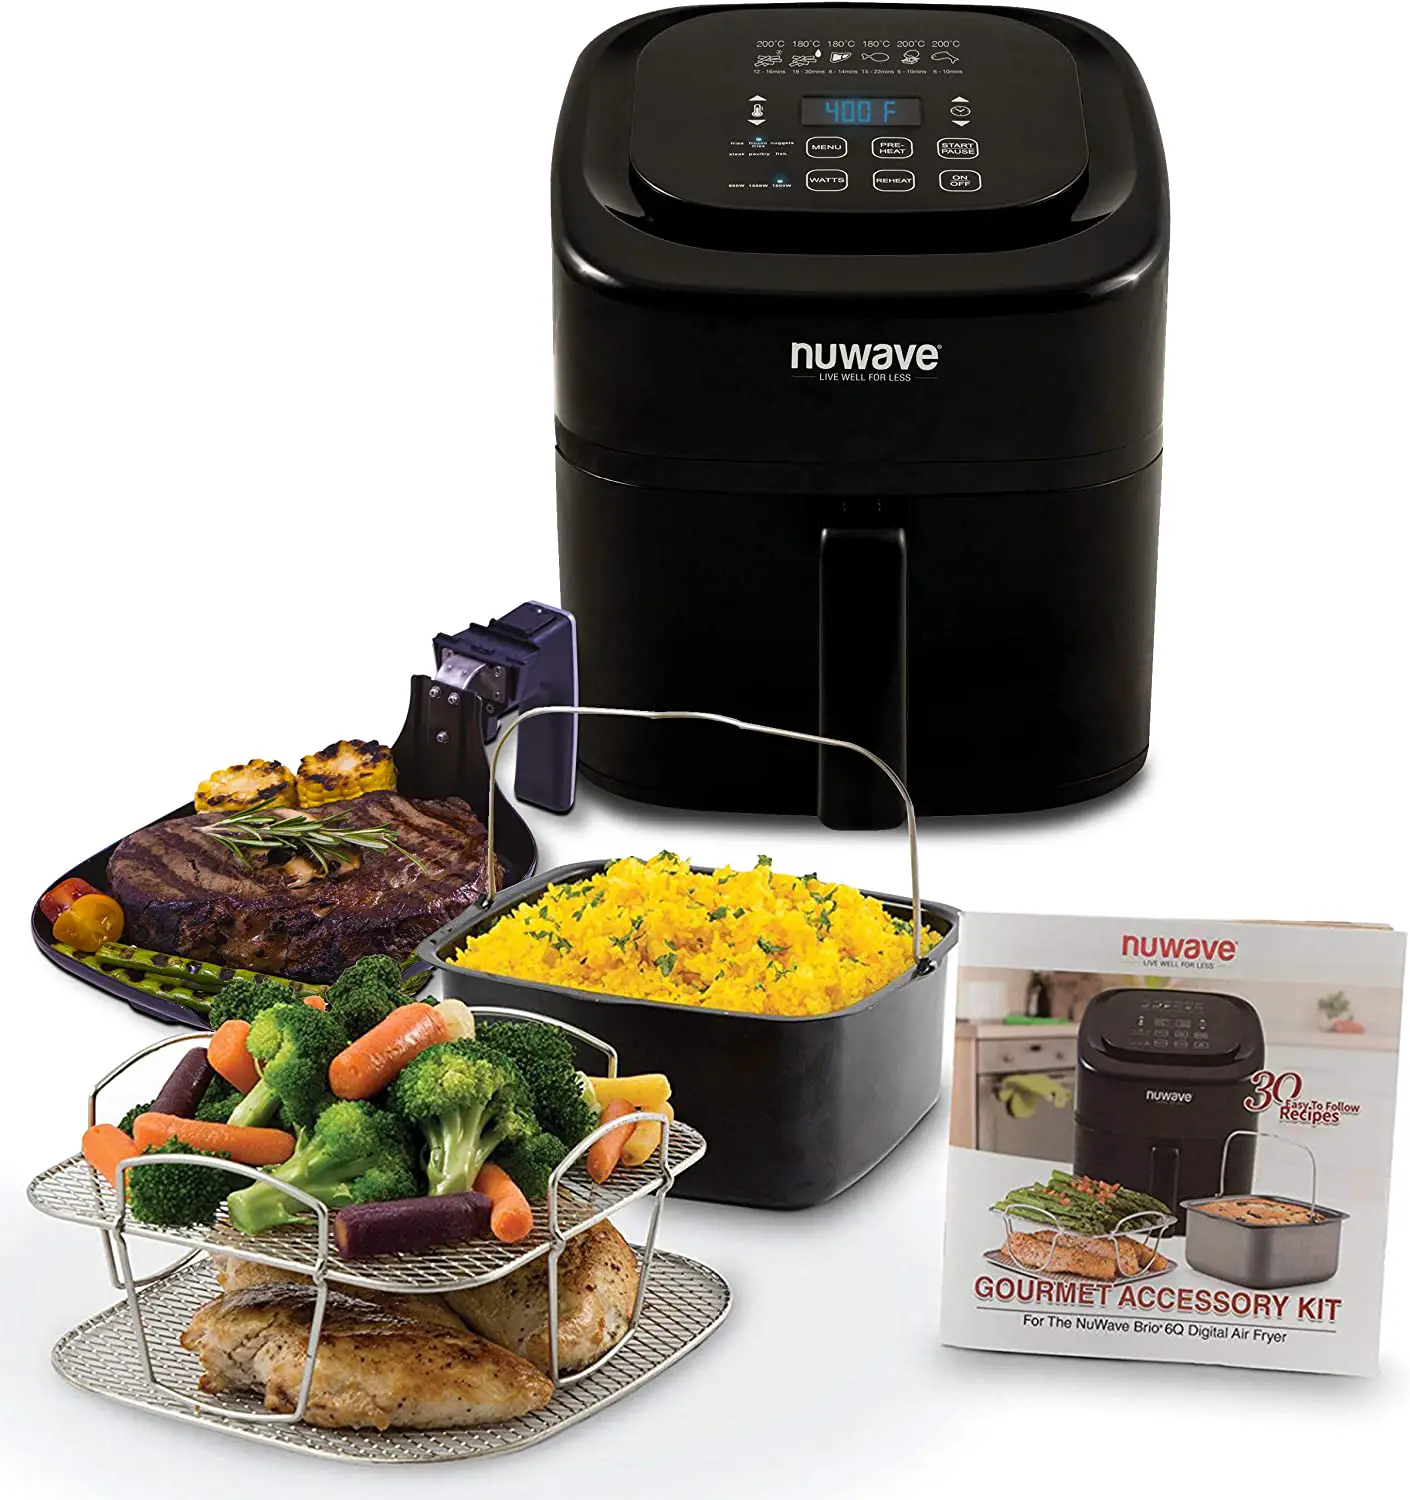 Which Is The Best Nuwave Brio Air Fryer 6 Qt Accessory Kit